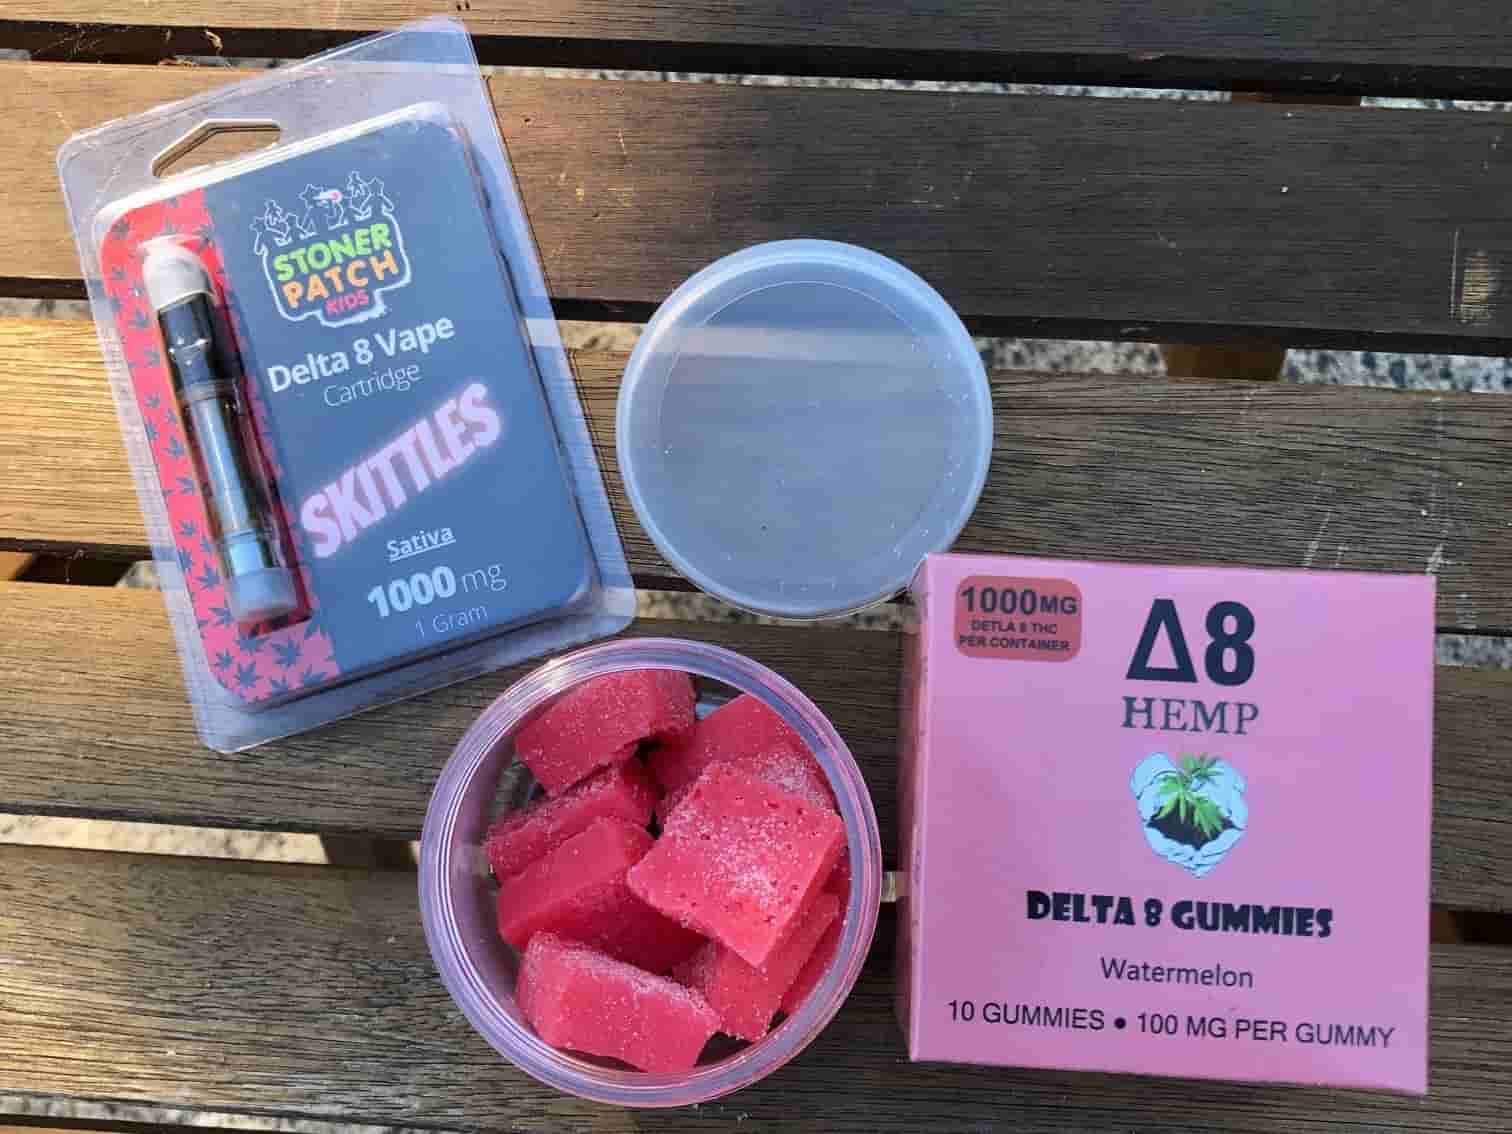 HALF GRAM DELTA 8 CARTS - Gummies|Thc|Products|Hemp|Product|Brand|Effects|Delta|Gummy|Cbd|Origin|Quality|Dosage|Delta-8|Dose|Usasource|Flavors|Brands|Ingredients|Range|Customers|Edibles|Cartridges|Reviews|Side|List|Health|Cannabis|Lab|Customer|Options|Benefits|Overviewproducts|Research|Time|Market|Drug|Farms|Party|People|Delta-8 Thc|Delta-8 Products|Delta-9 Thc|Delta-8 Gummies|Delta-8 Thc Products|Delta-8 Brands|Customer Reviews|Brand Overviewproducts|Drug Tests|Free Shipping|Similar Benefits|Vape Cartridges|Hemp Doctor|United States|Third Party Lab|Drug Test|Thc Edibles|Health Canada|Cannabis Plant|Side Effects|Organic Hemp|Diamond Cbd|Reaction Time|Legal Hemp|Psychoactive Effects|Psychoactive Properties|Third Party|Dry Eyes|Delta-8 Market|Tolerance Level